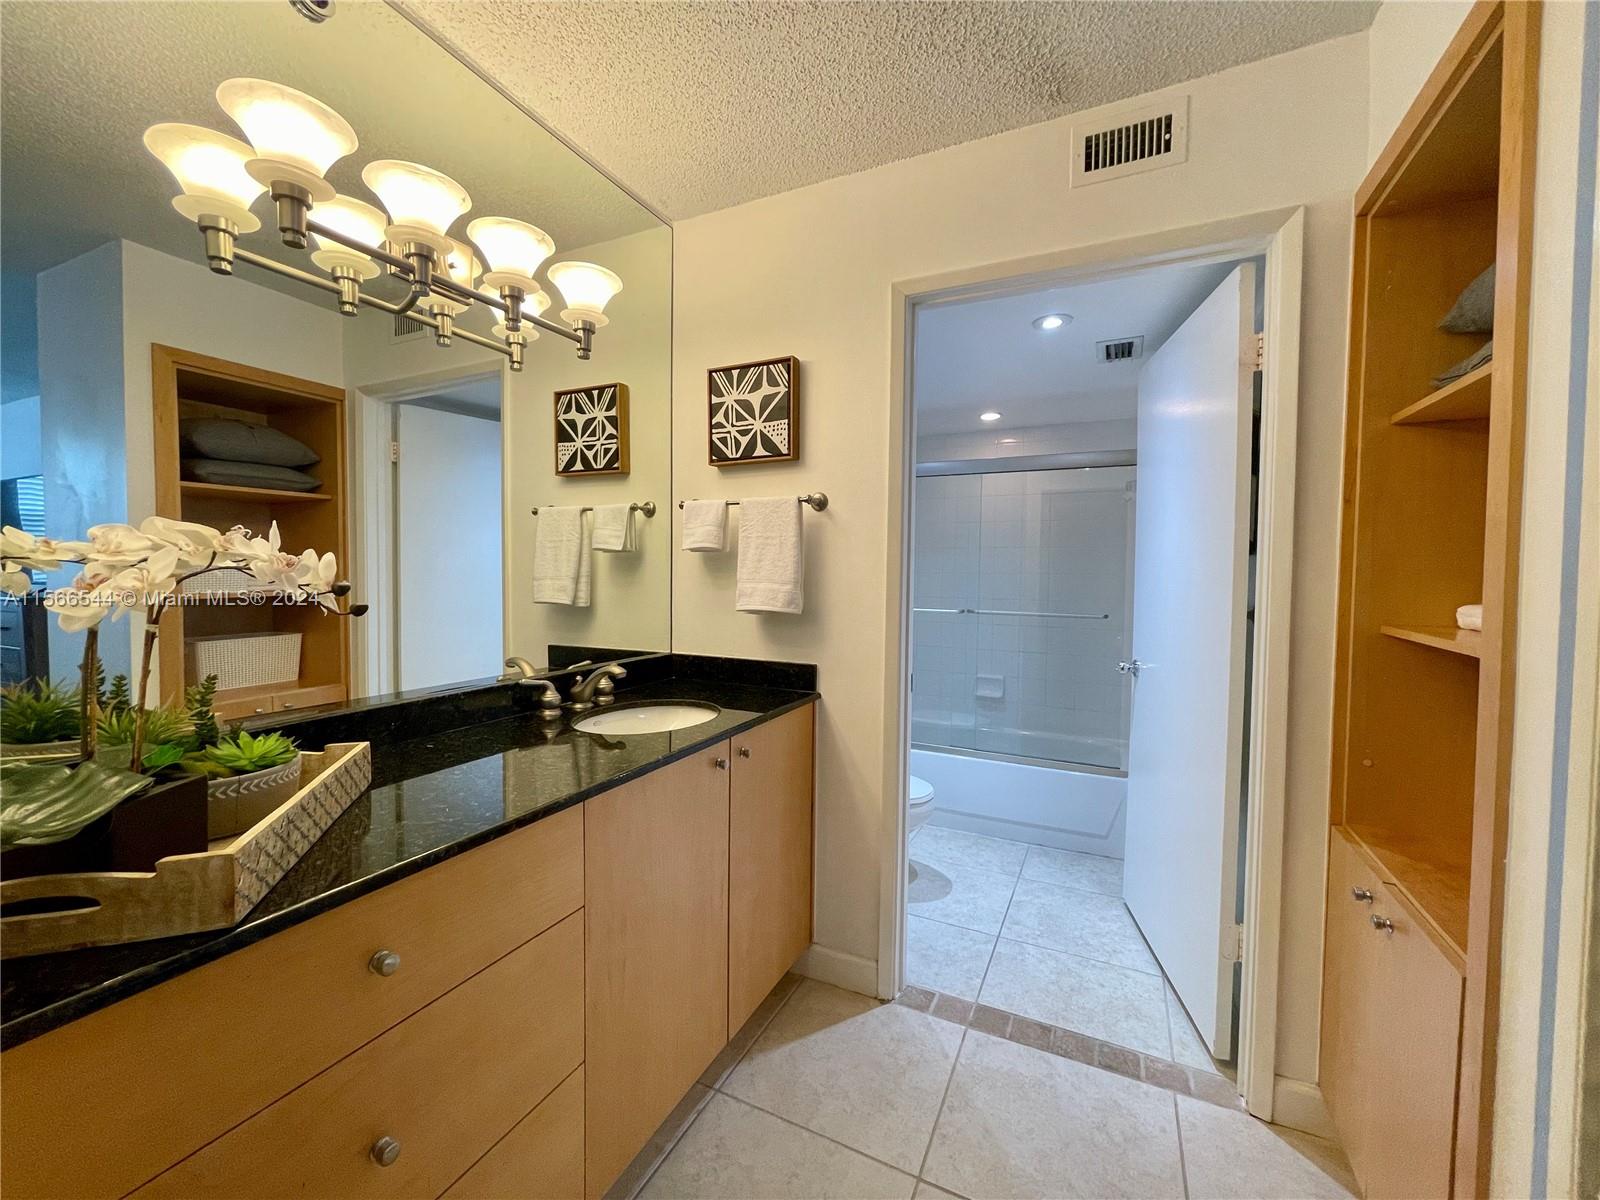 19555 E Country Club Dr Unit 8608, Aventura, Florida, 33180, United States, 2 Bedrooms Bedrooms, ,2 BathroomsBathrooms,Residential,For Sale,19555 E Country Club Dr Unit 8608,1505513